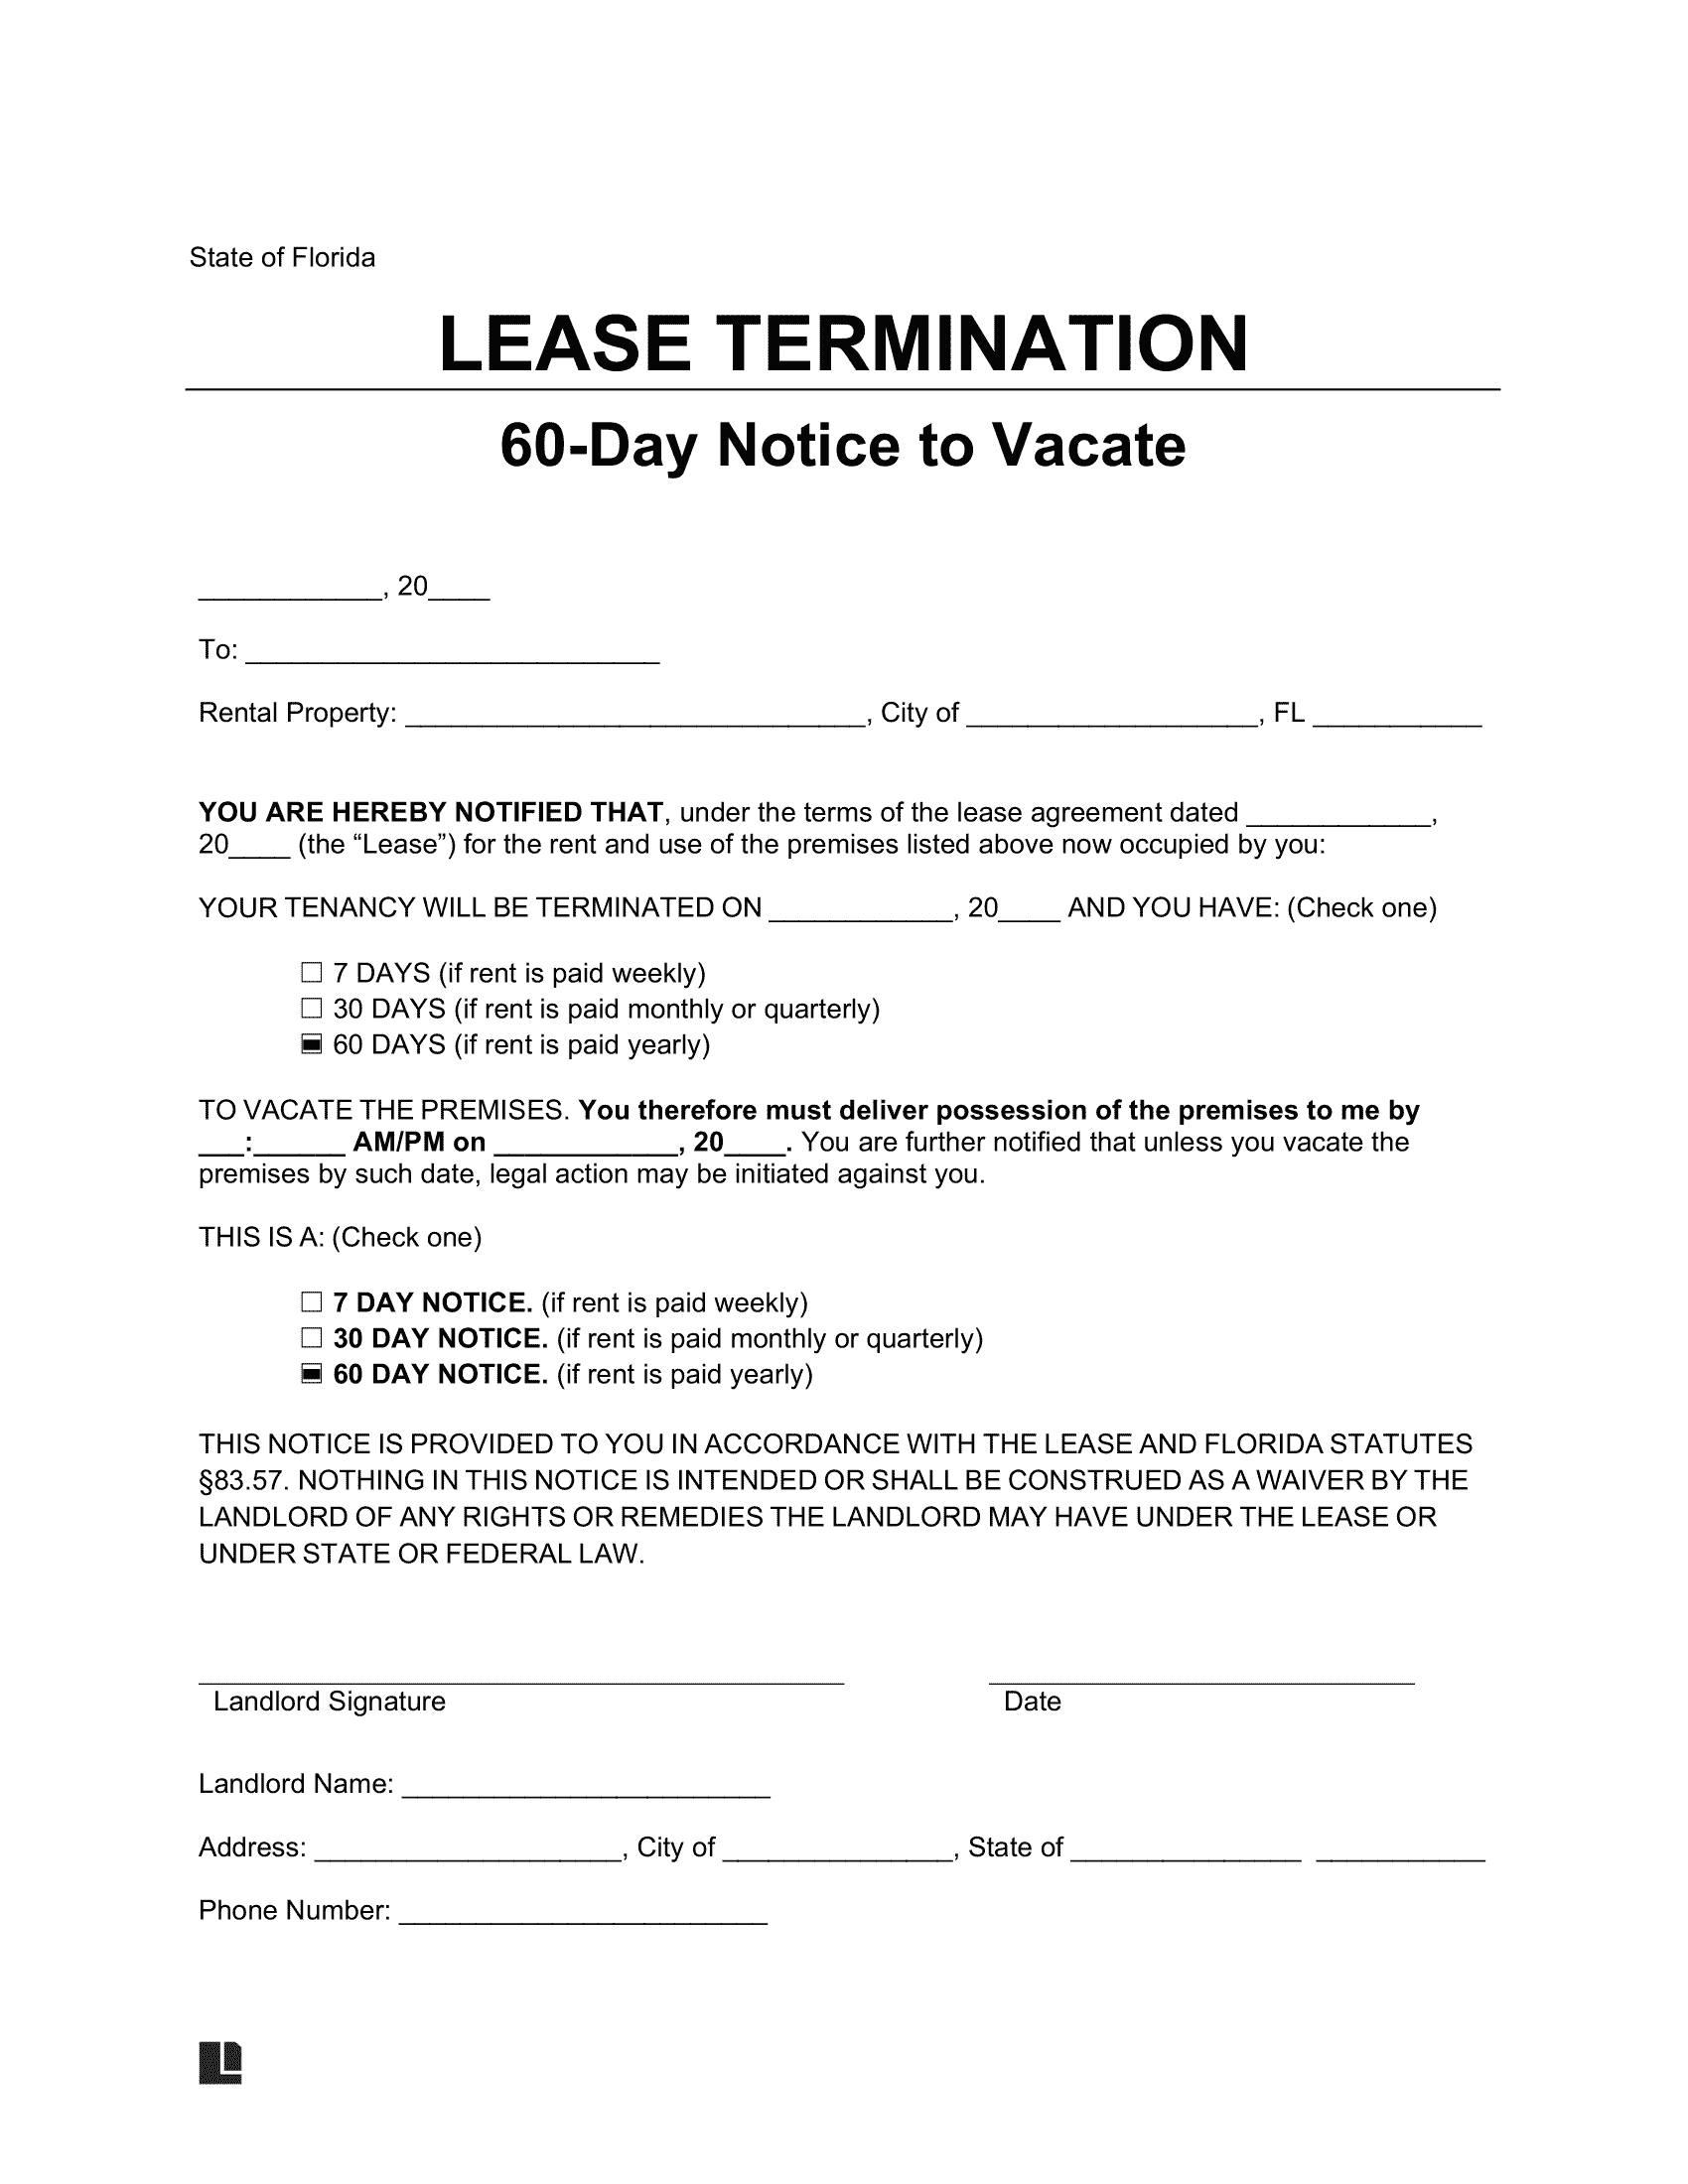 Florida 60-Day Notice Lease Termination